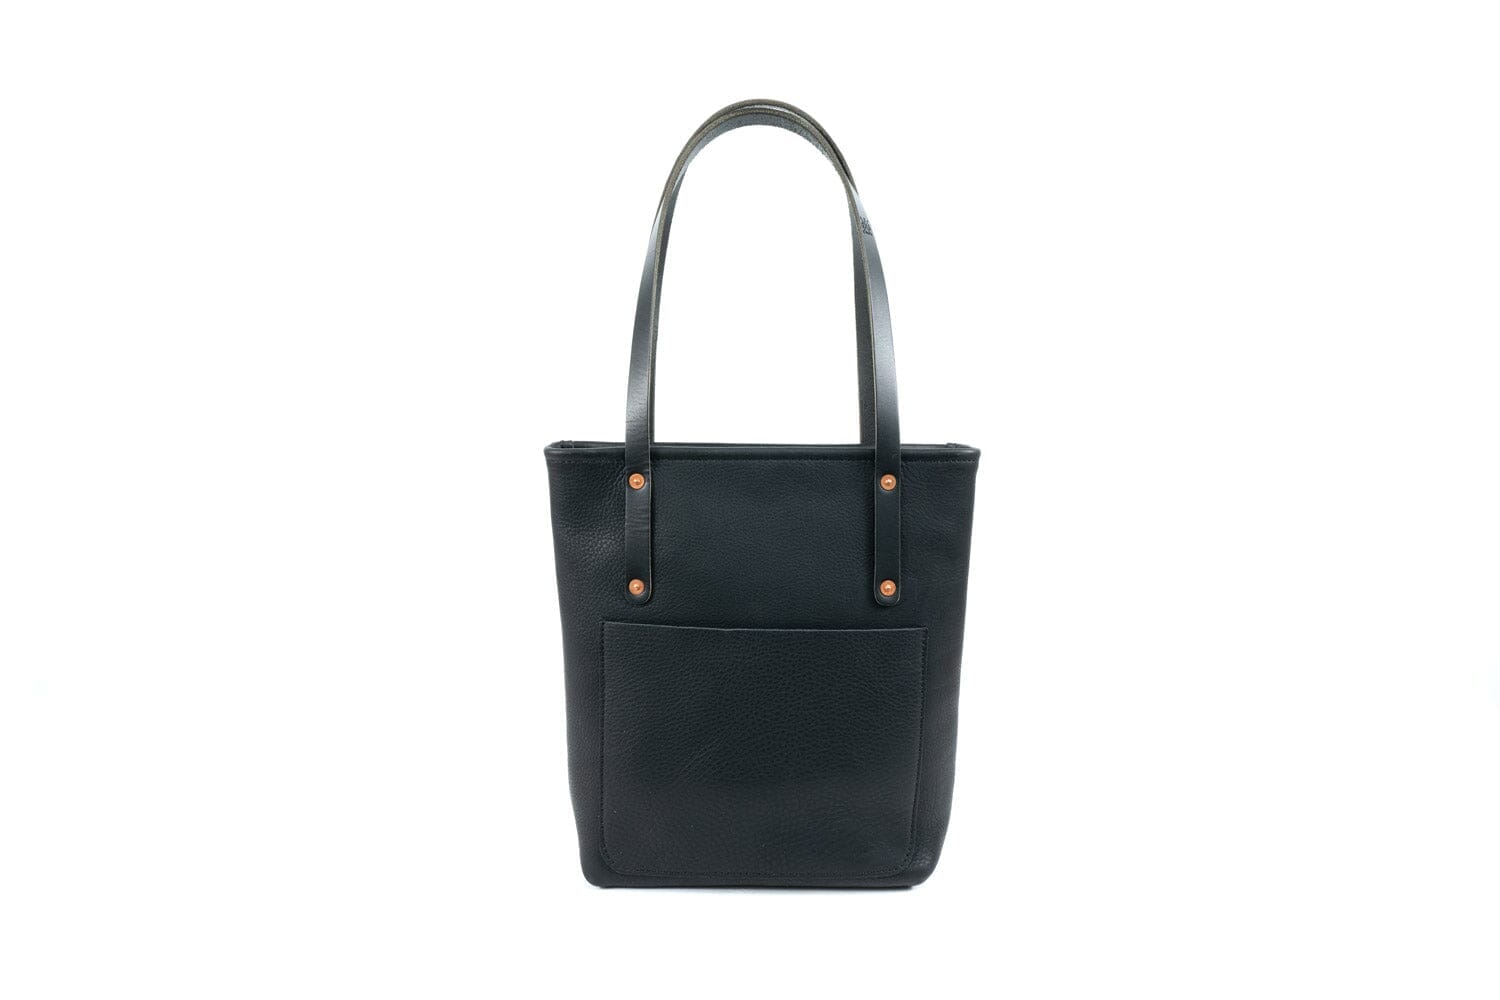 Go Forth Goods Avery Leather Tote Bag with Zipper - Slim Medium Deluxe (RTS) Black Bison (Limited Edition)